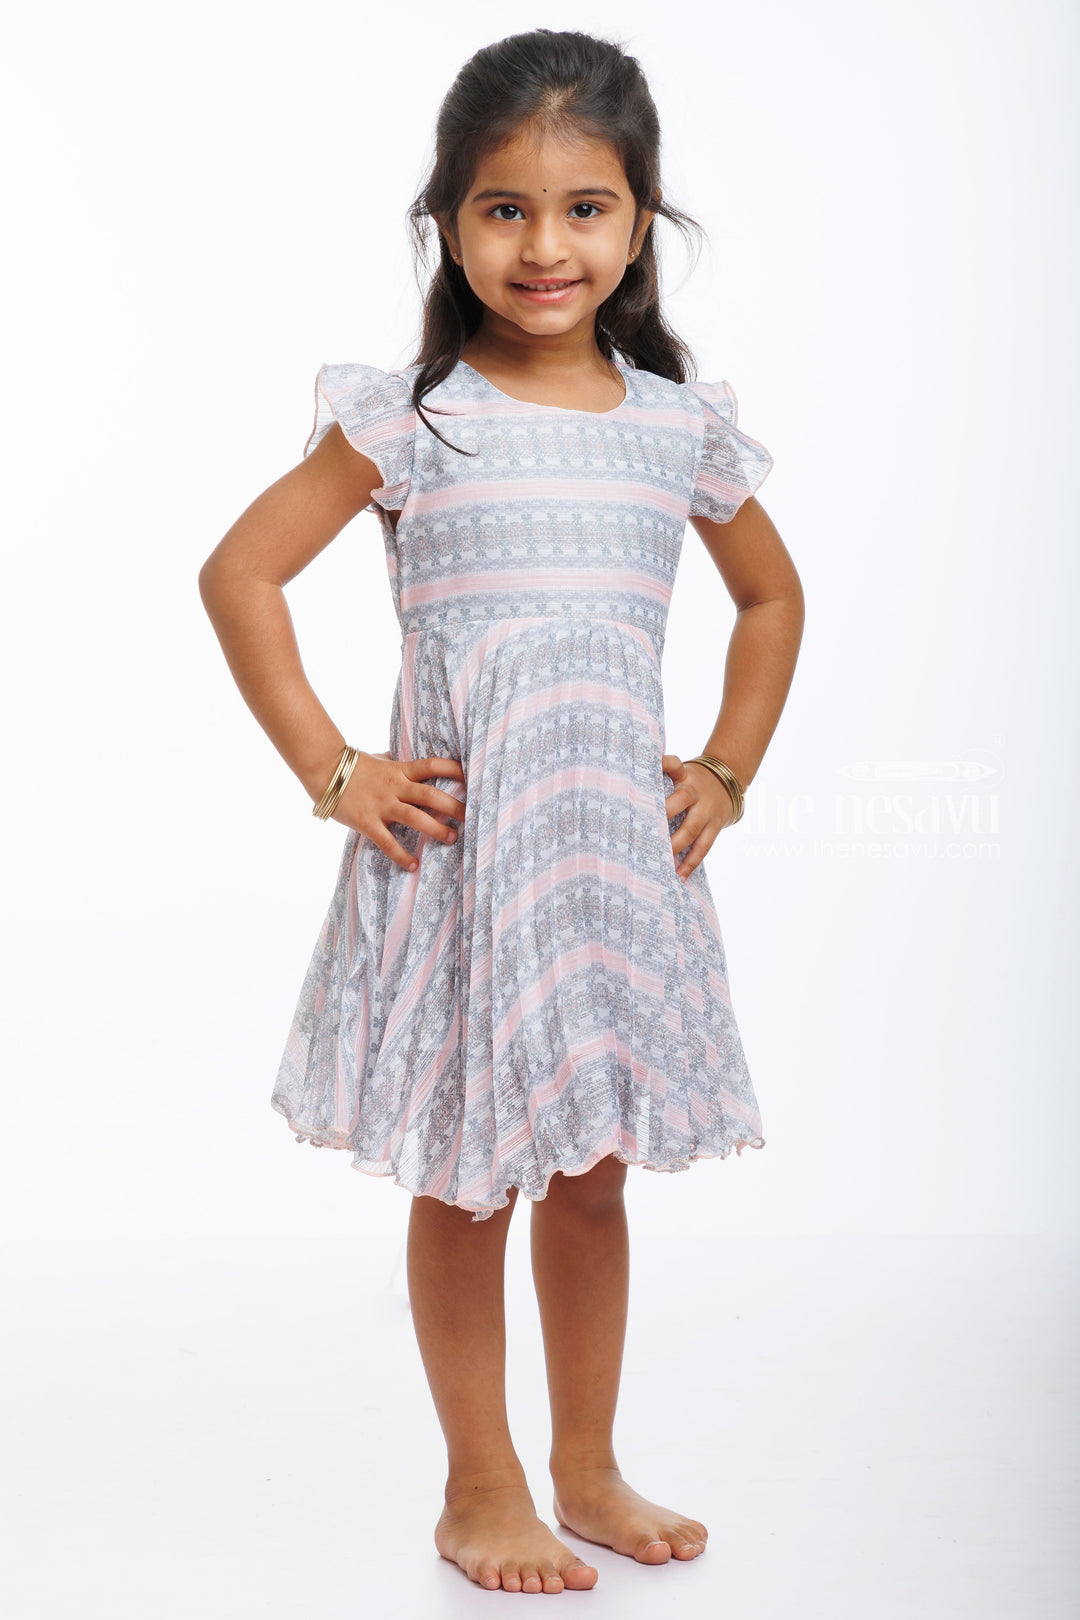 The Nesavu Baby Fancy Frock Baby Girls Whimsical Floral Stripe Summer Dress - Ethereal Comfort Nesavu 16 (1Y) / Pink / Georgette BFJ541B-16 Girls Pink and Grey Floral Stripe Dress | Perfect for Playdates and Parties | The Nesavu